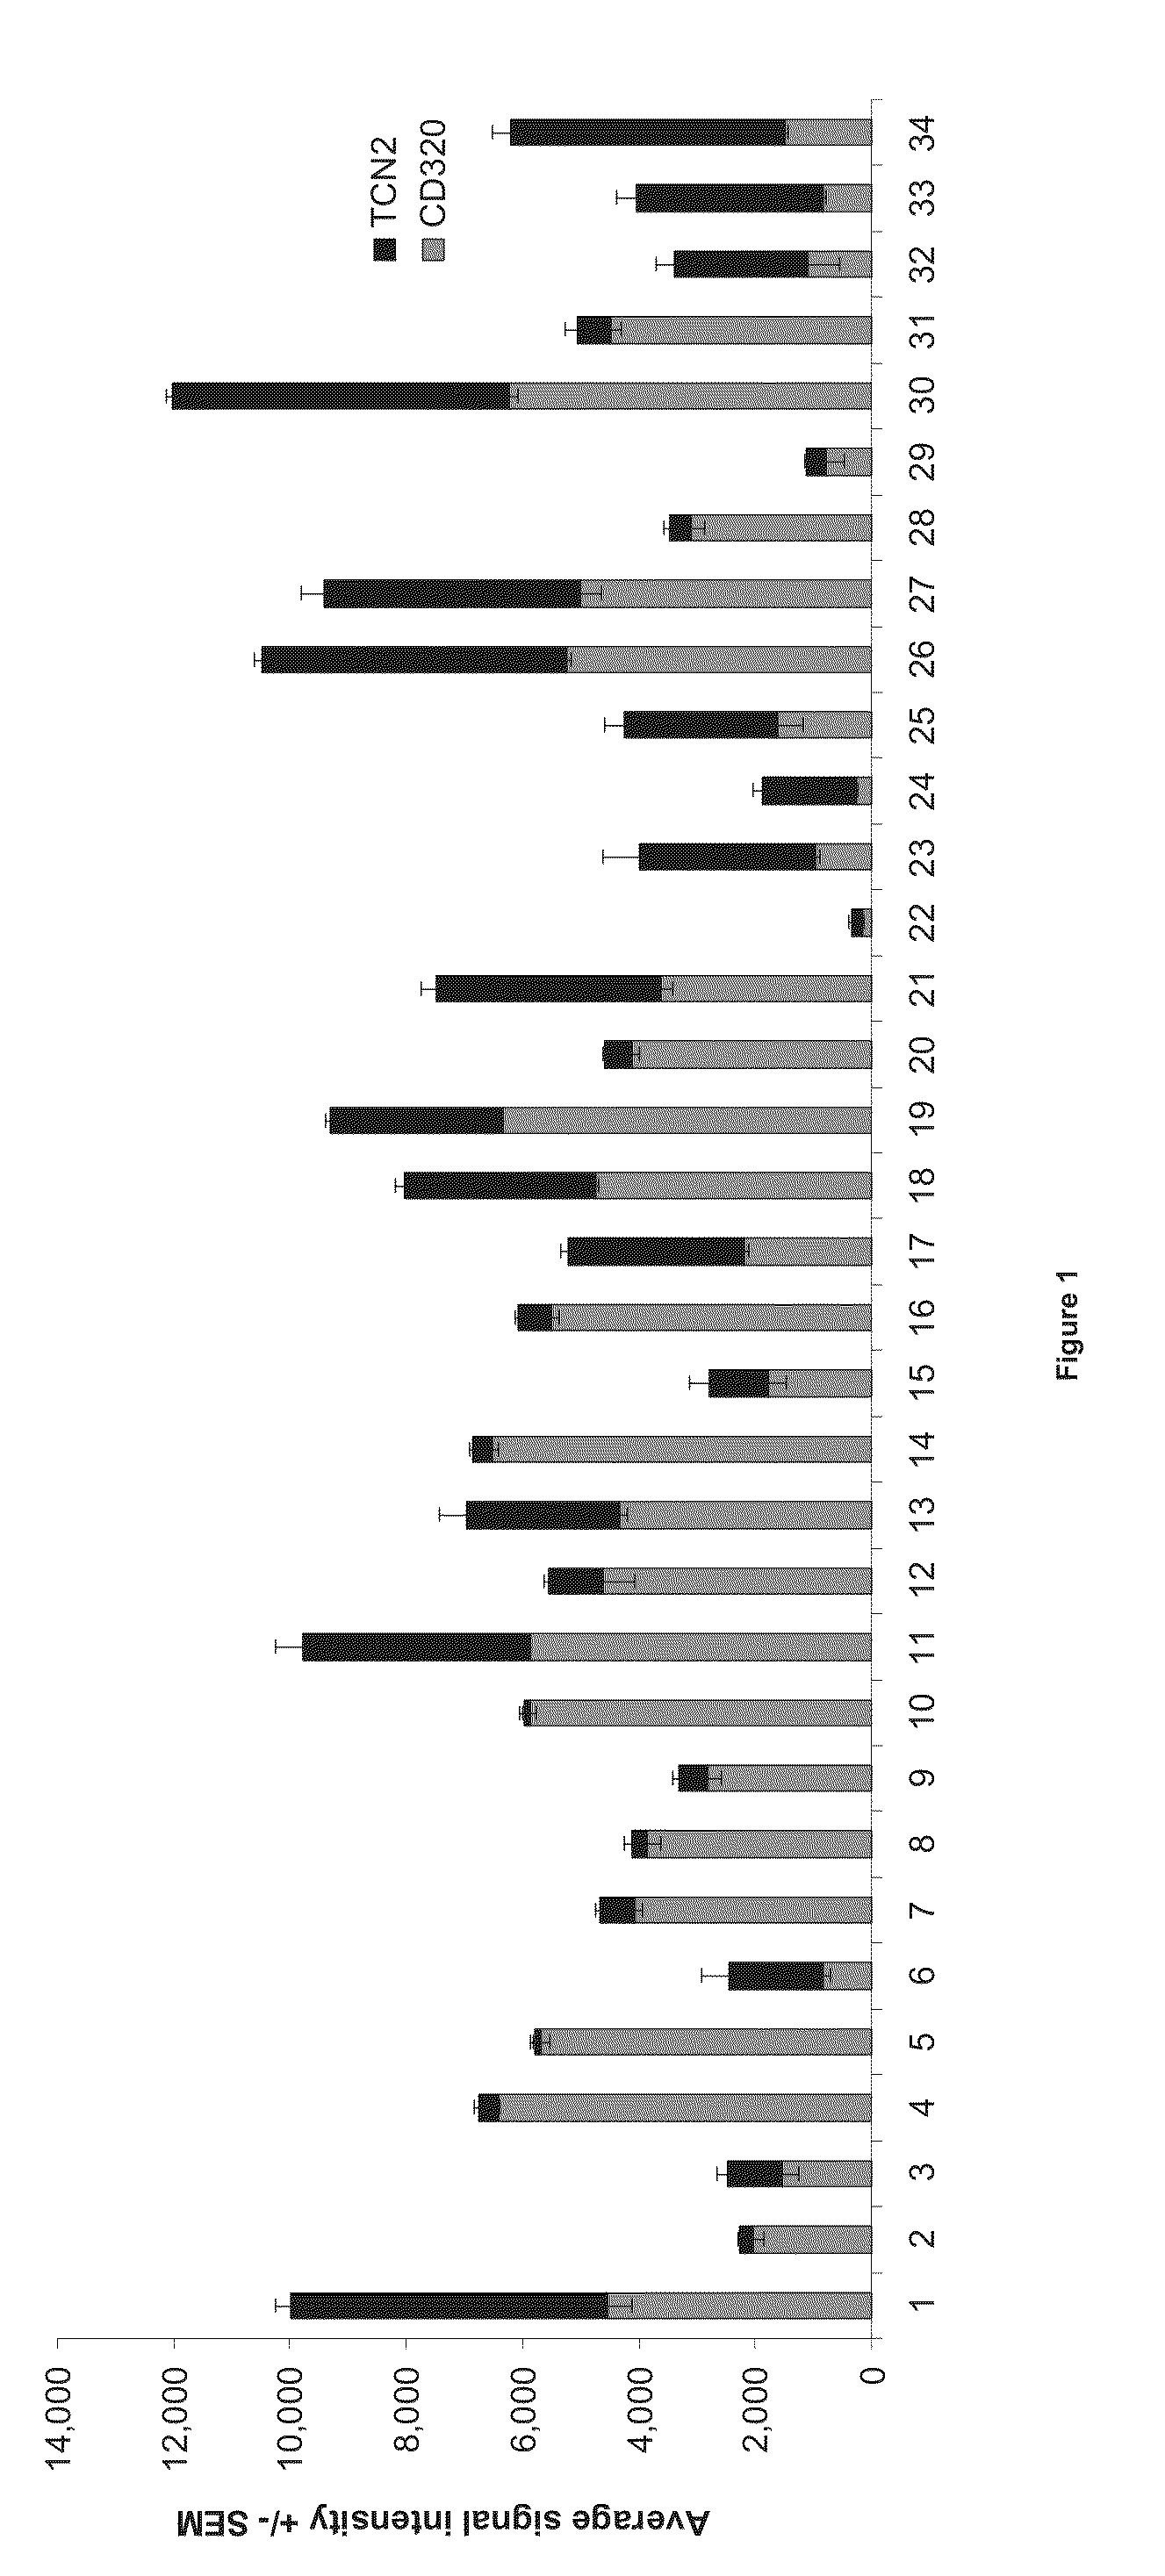 Methods for the diagnosis, treatment and monitoring of cancer